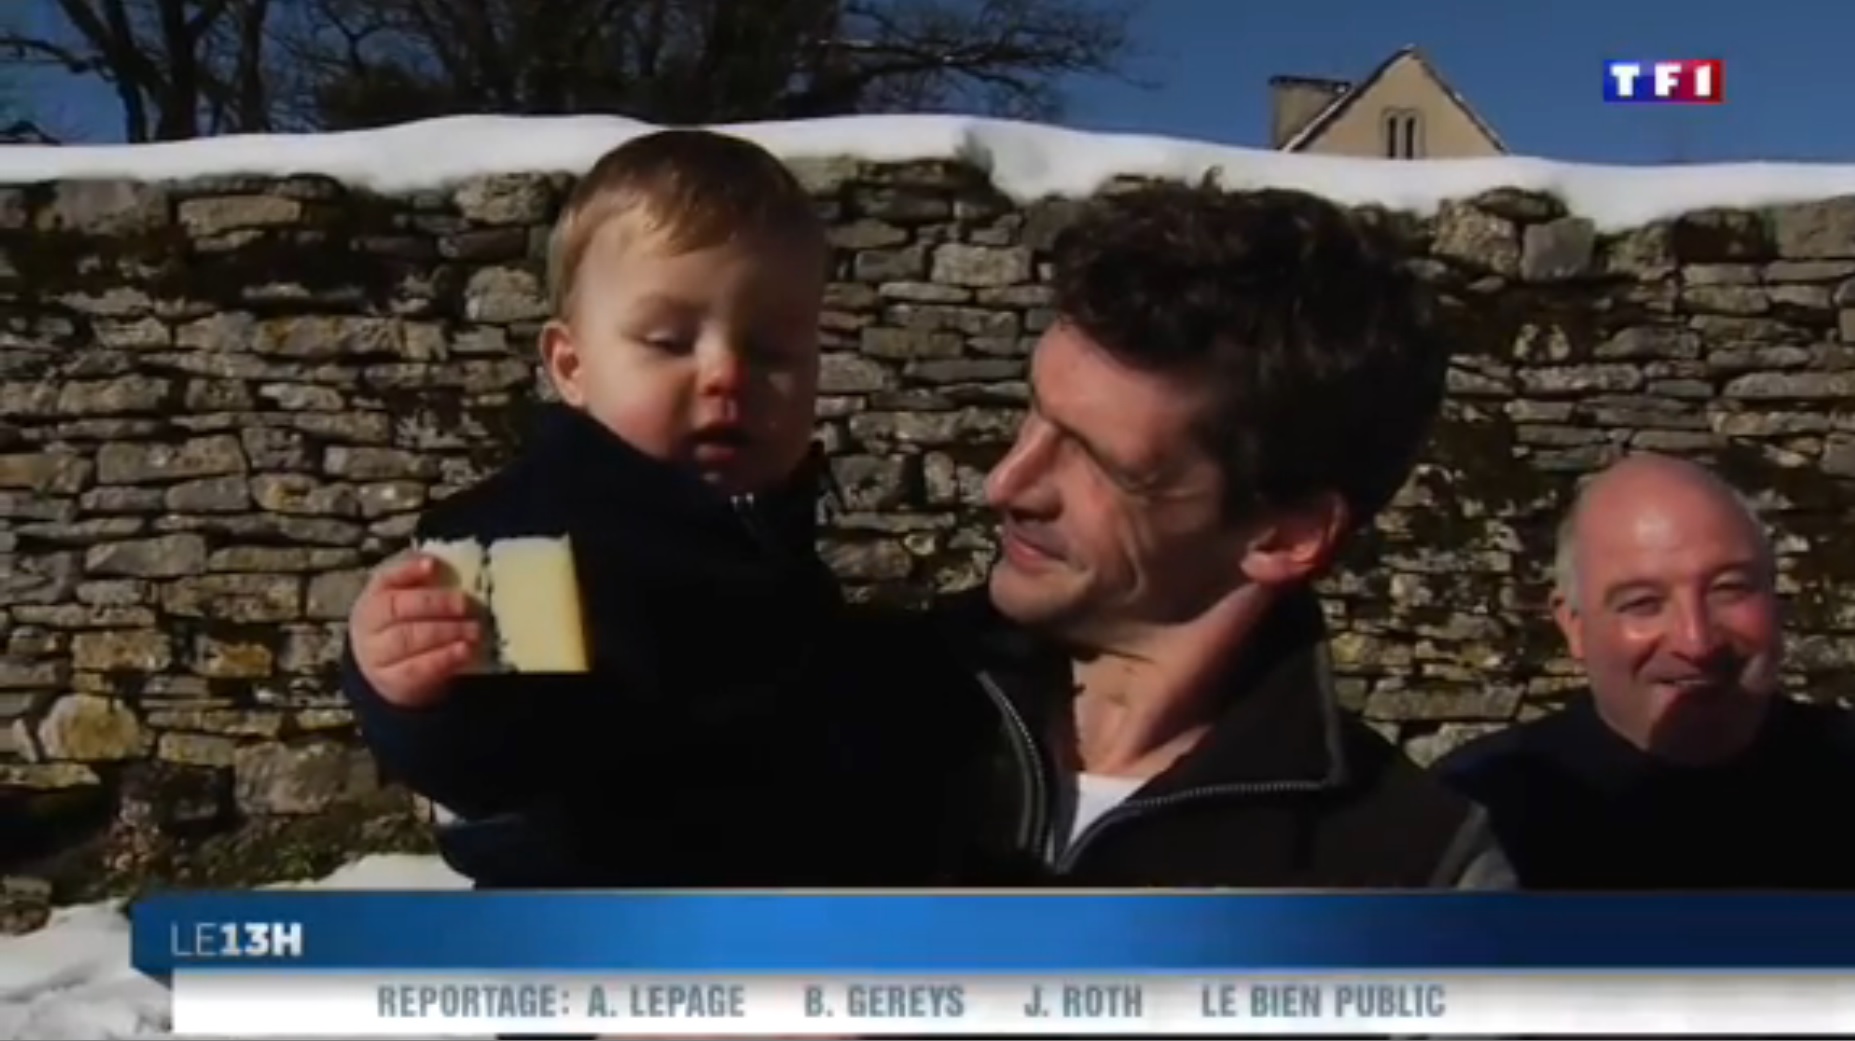 TF1 Jura (2-5) - une famille de fromagers  54